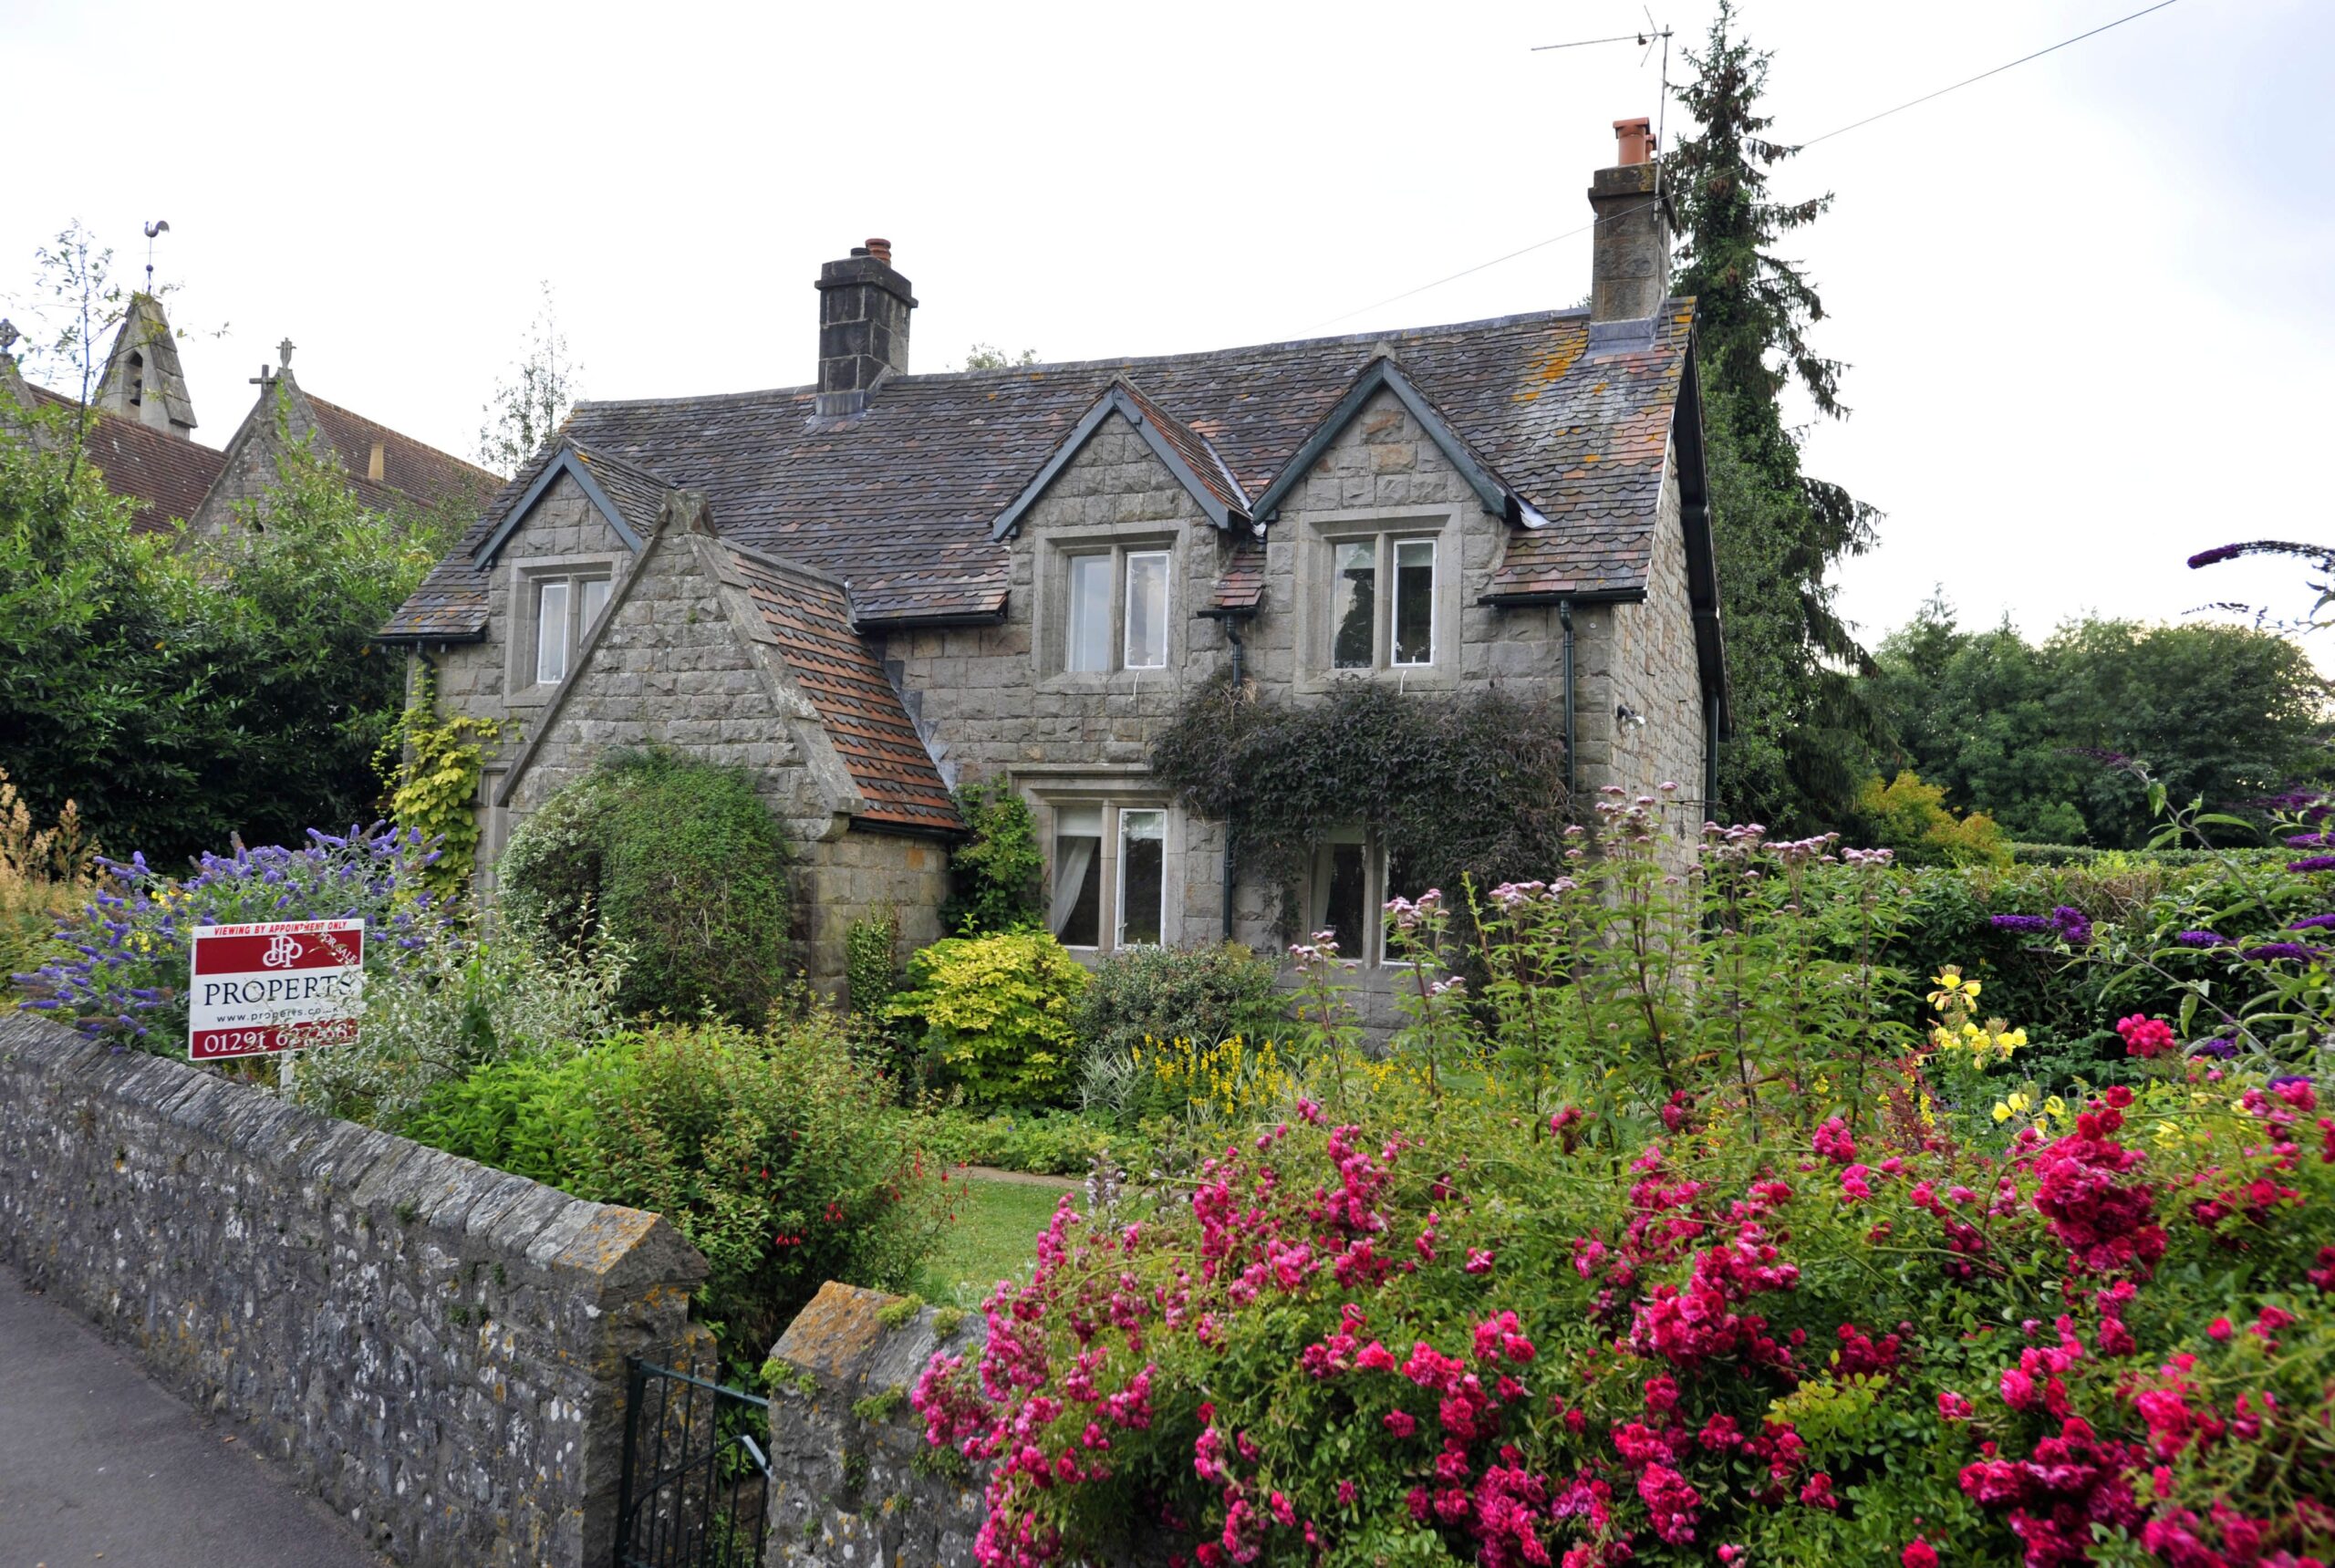 J.K. Rowling's childhood home, Church Cottage at Tutshill, is located in Chepstow